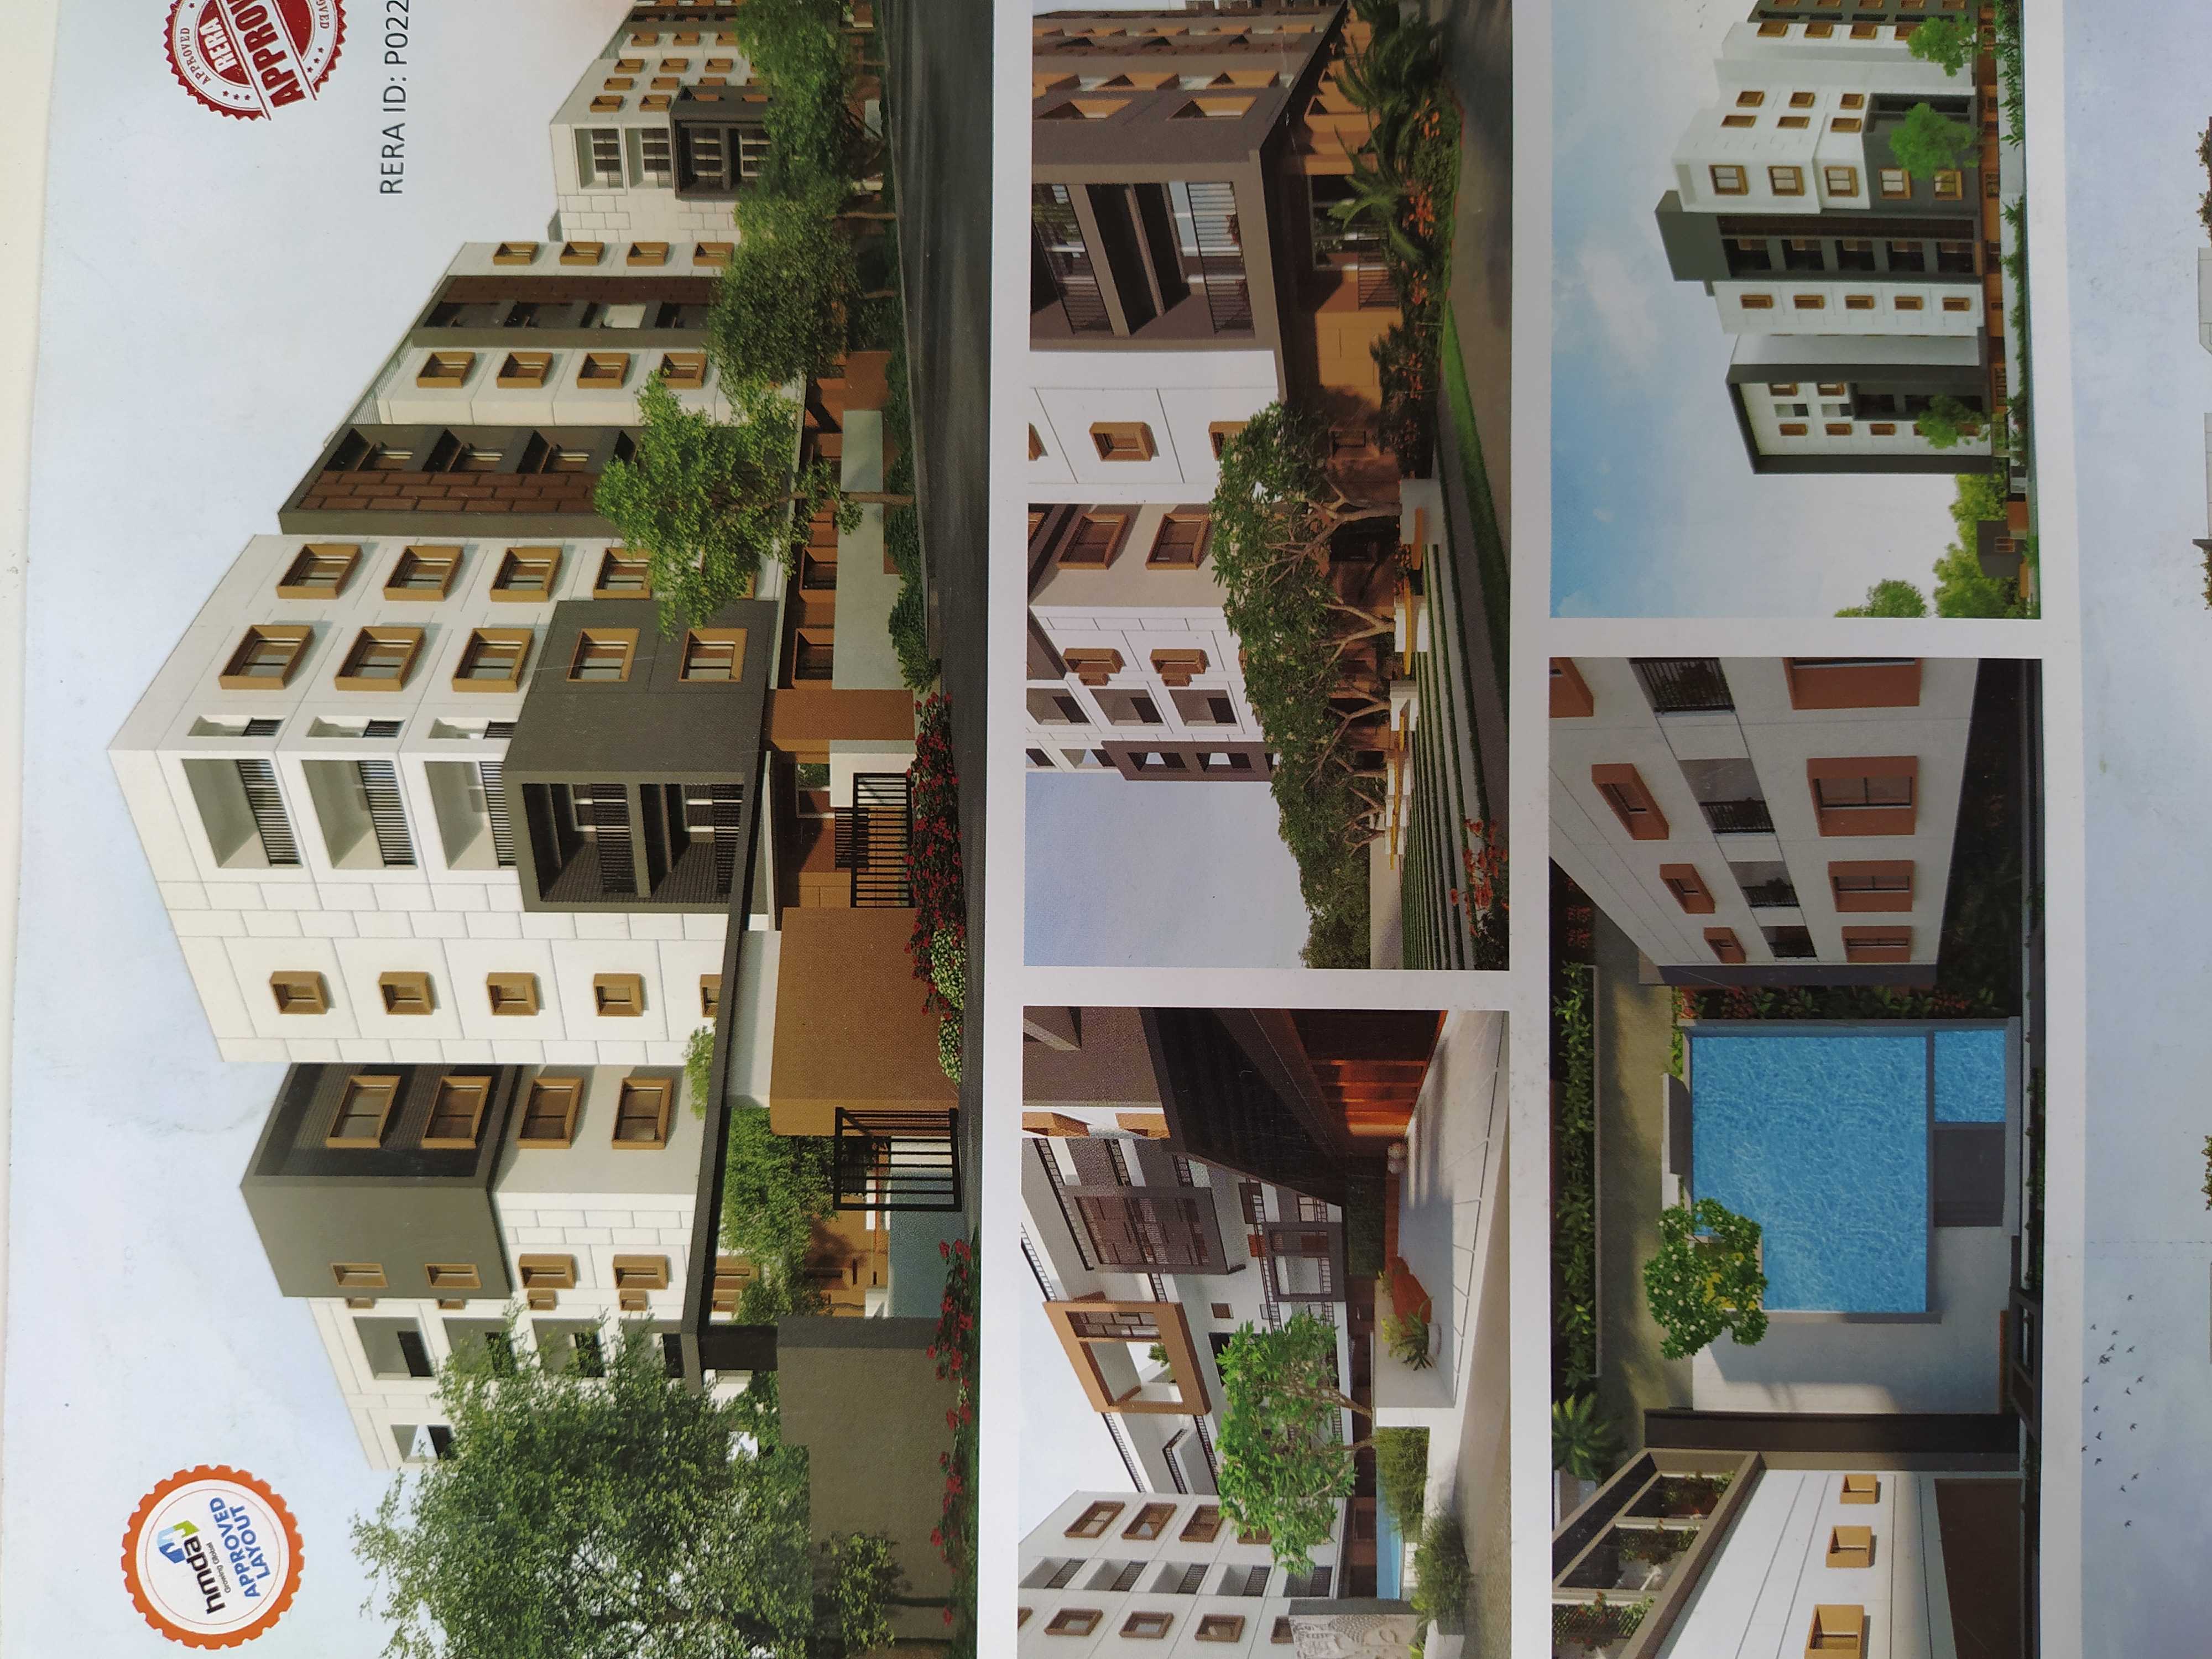 flats for sale in kompally